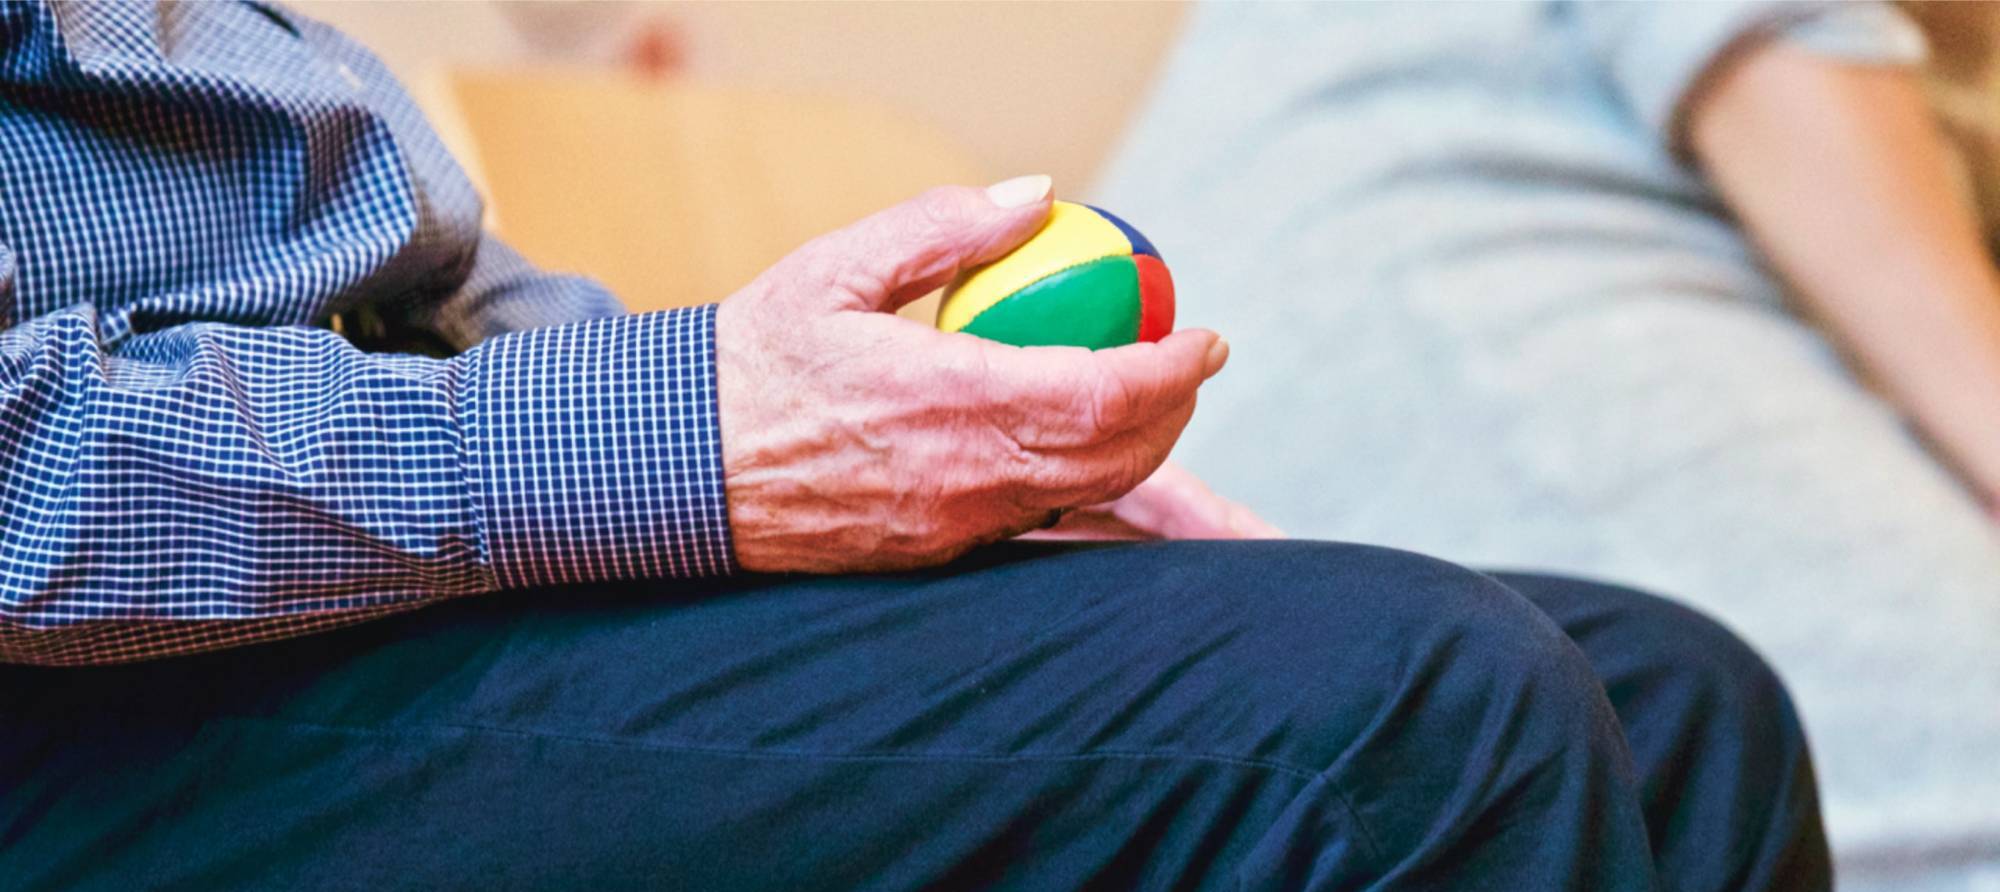 elderly patient with hand ball